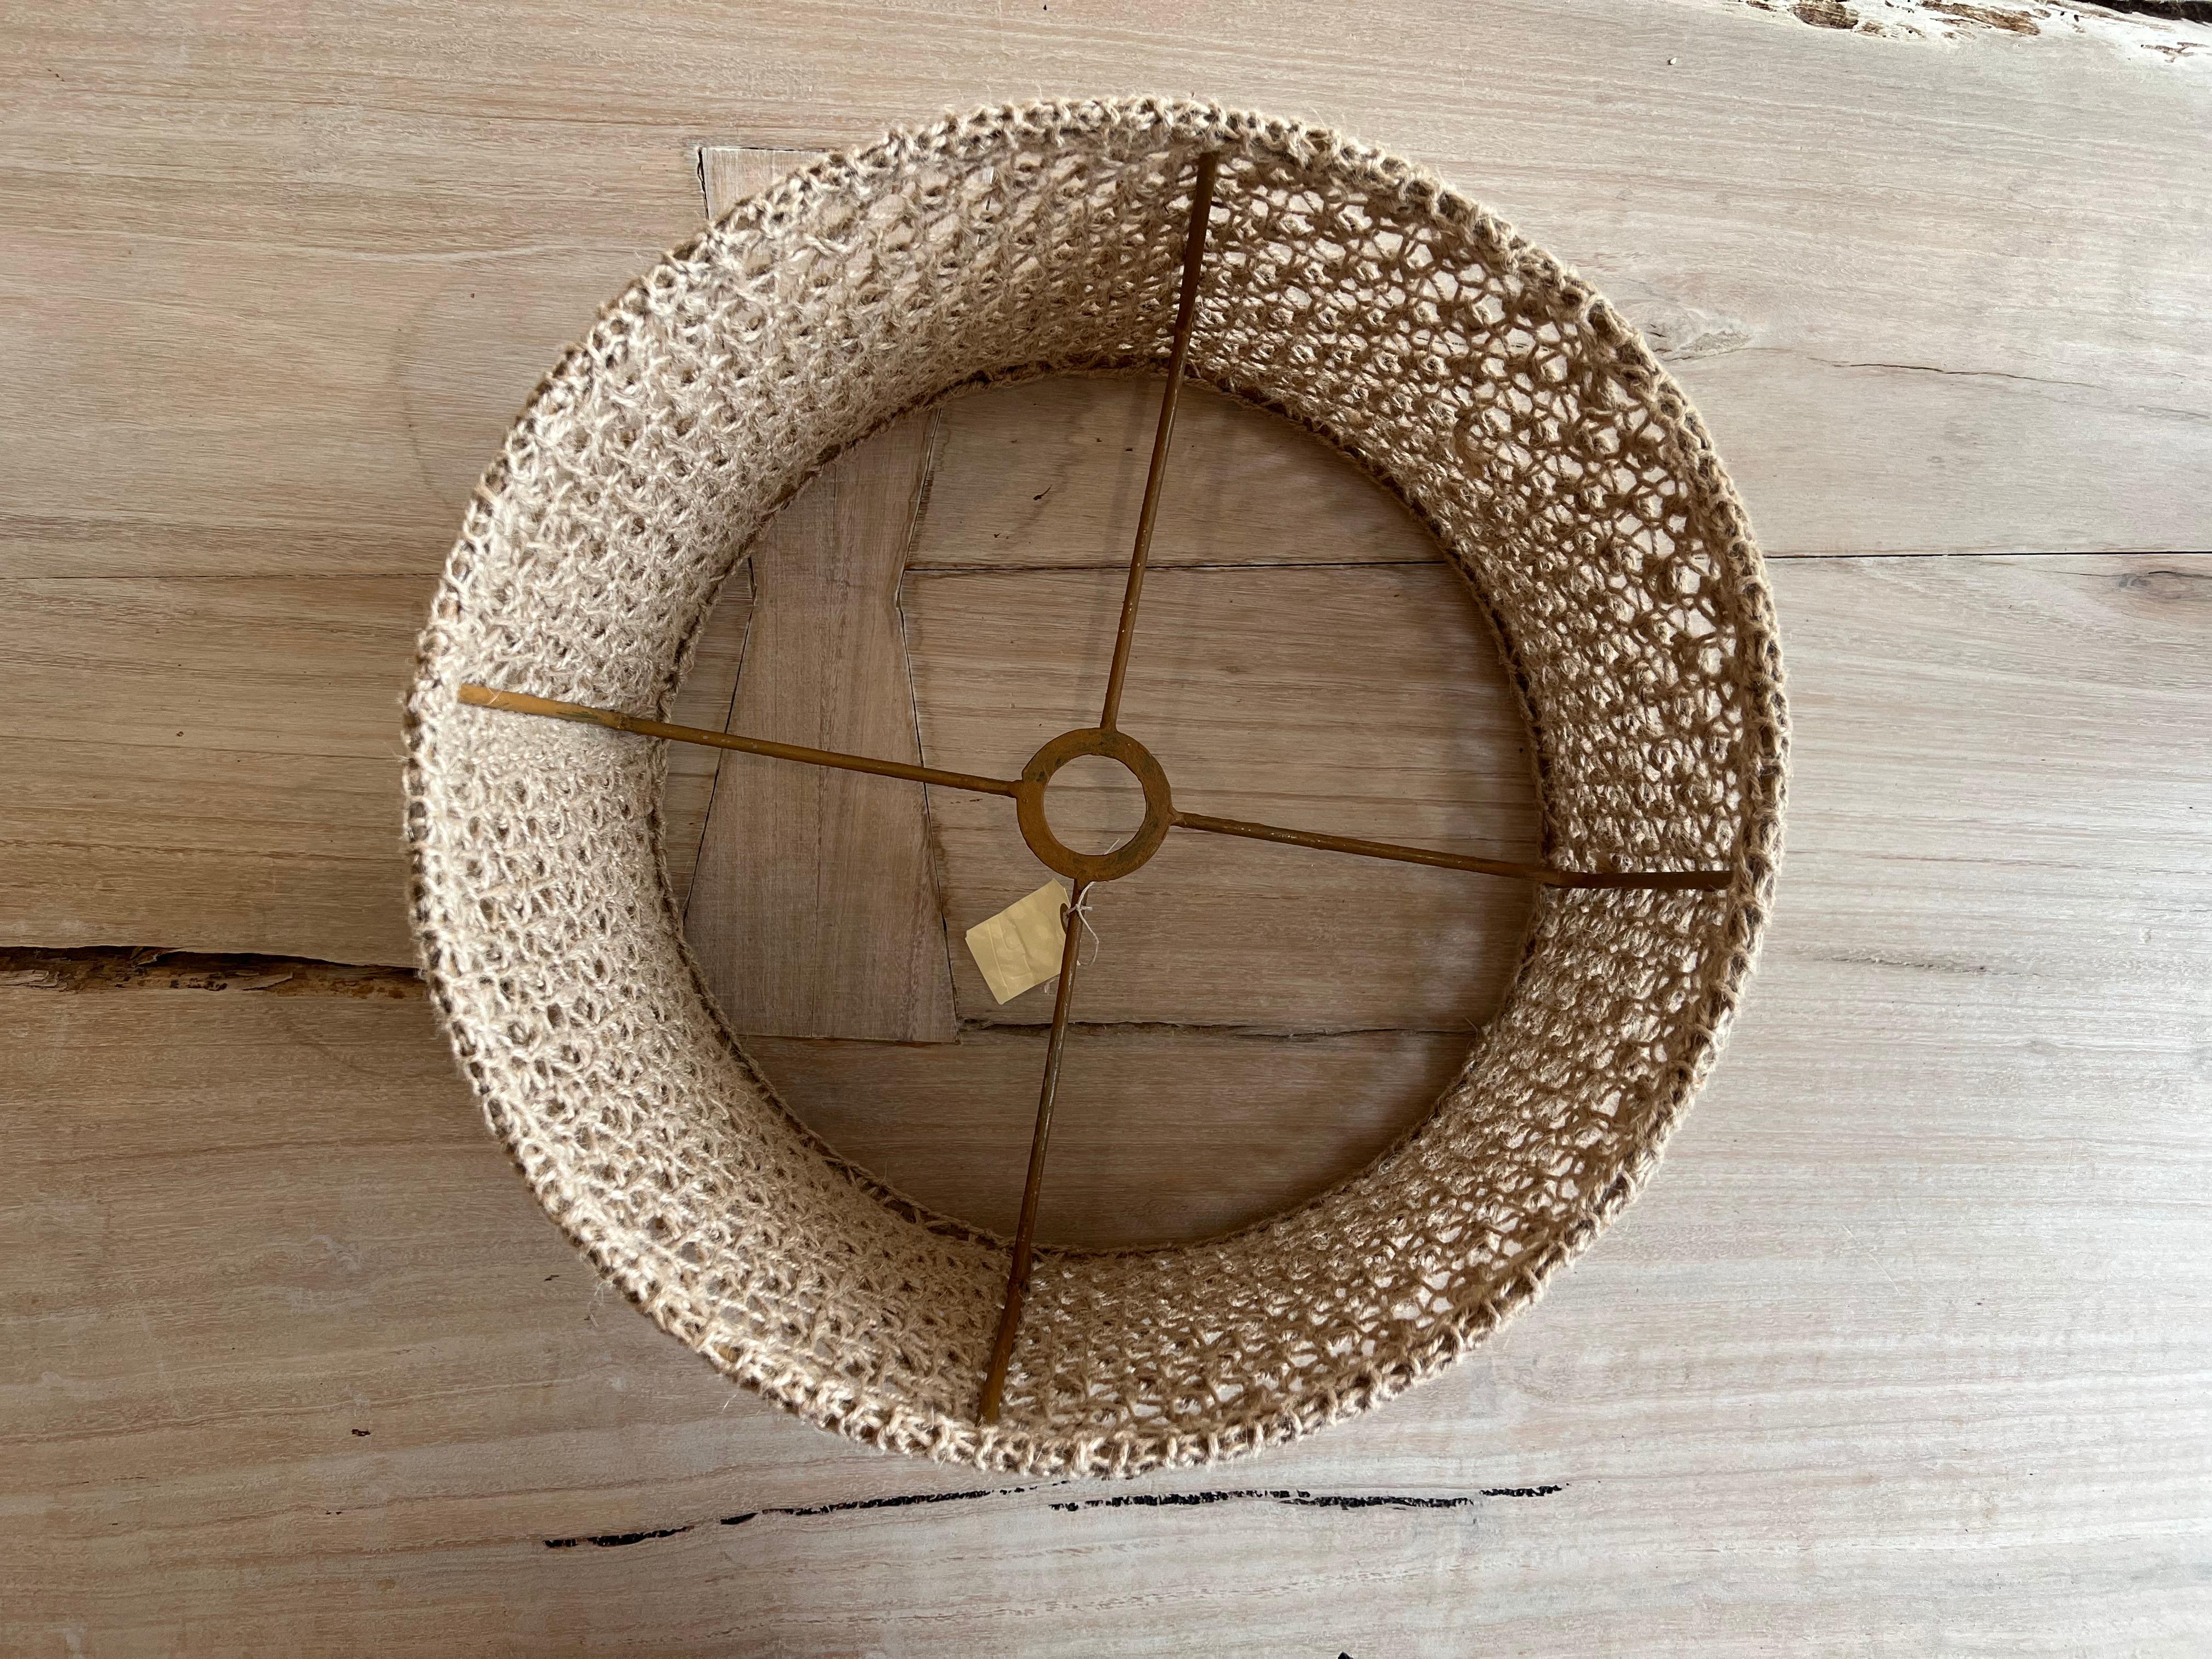 Handmade lampshade with 100% sustainable organic jute by the renowned Catalan brand 